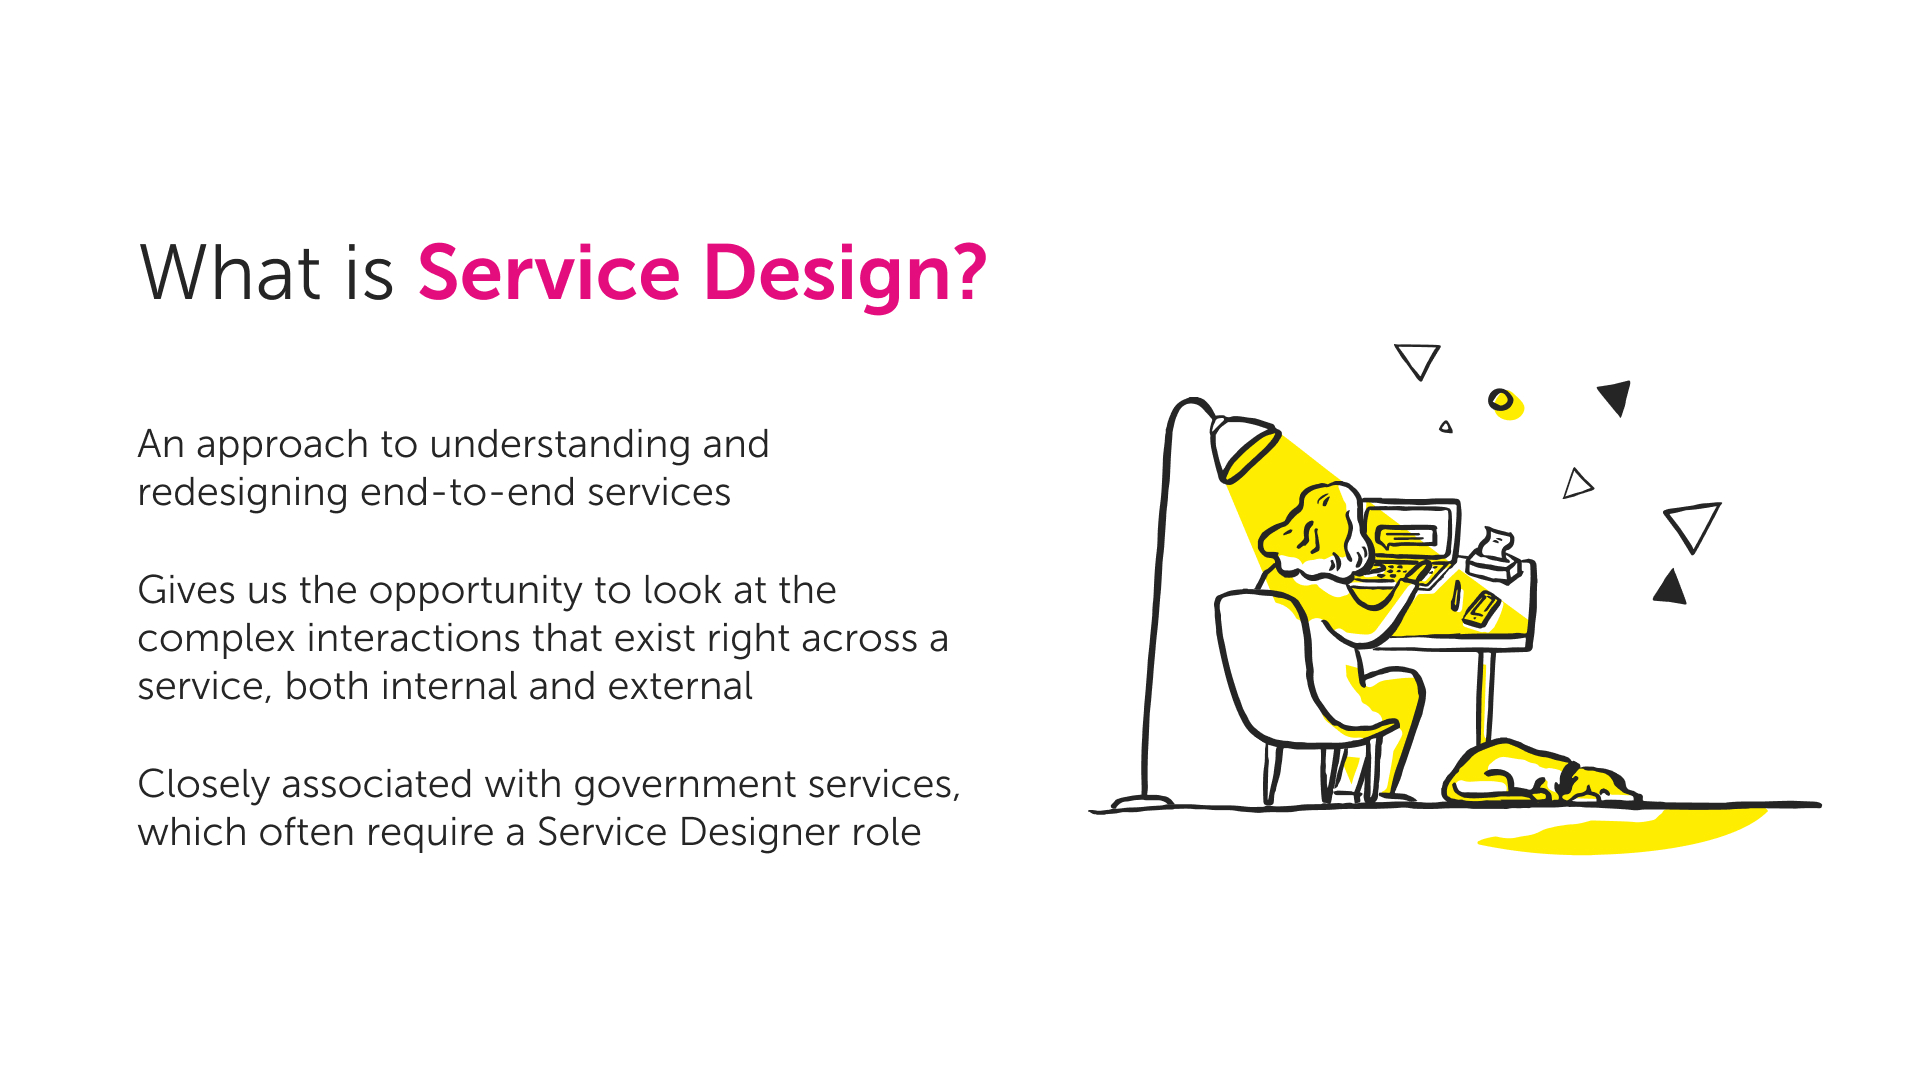 Image explaining 'What is service design?' - definitions provided in text